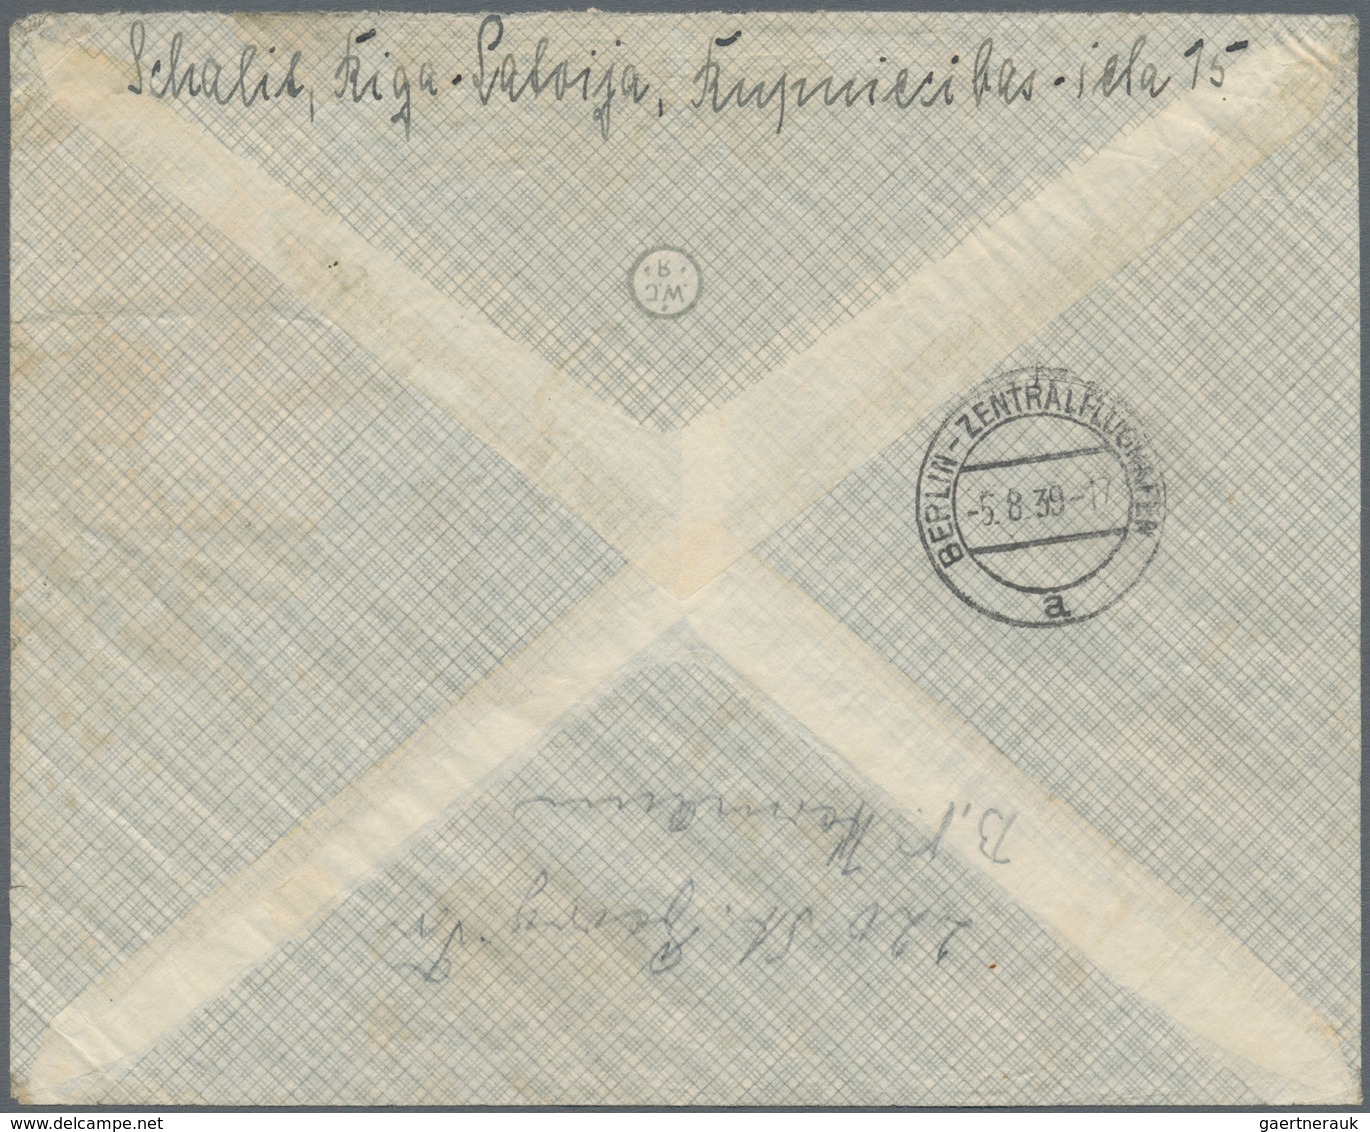 Lettland: 1939. Flimsy Airmail Envelope Endorsed "By Airmail" To An Address In PERTH, Australia, Fra - Letland